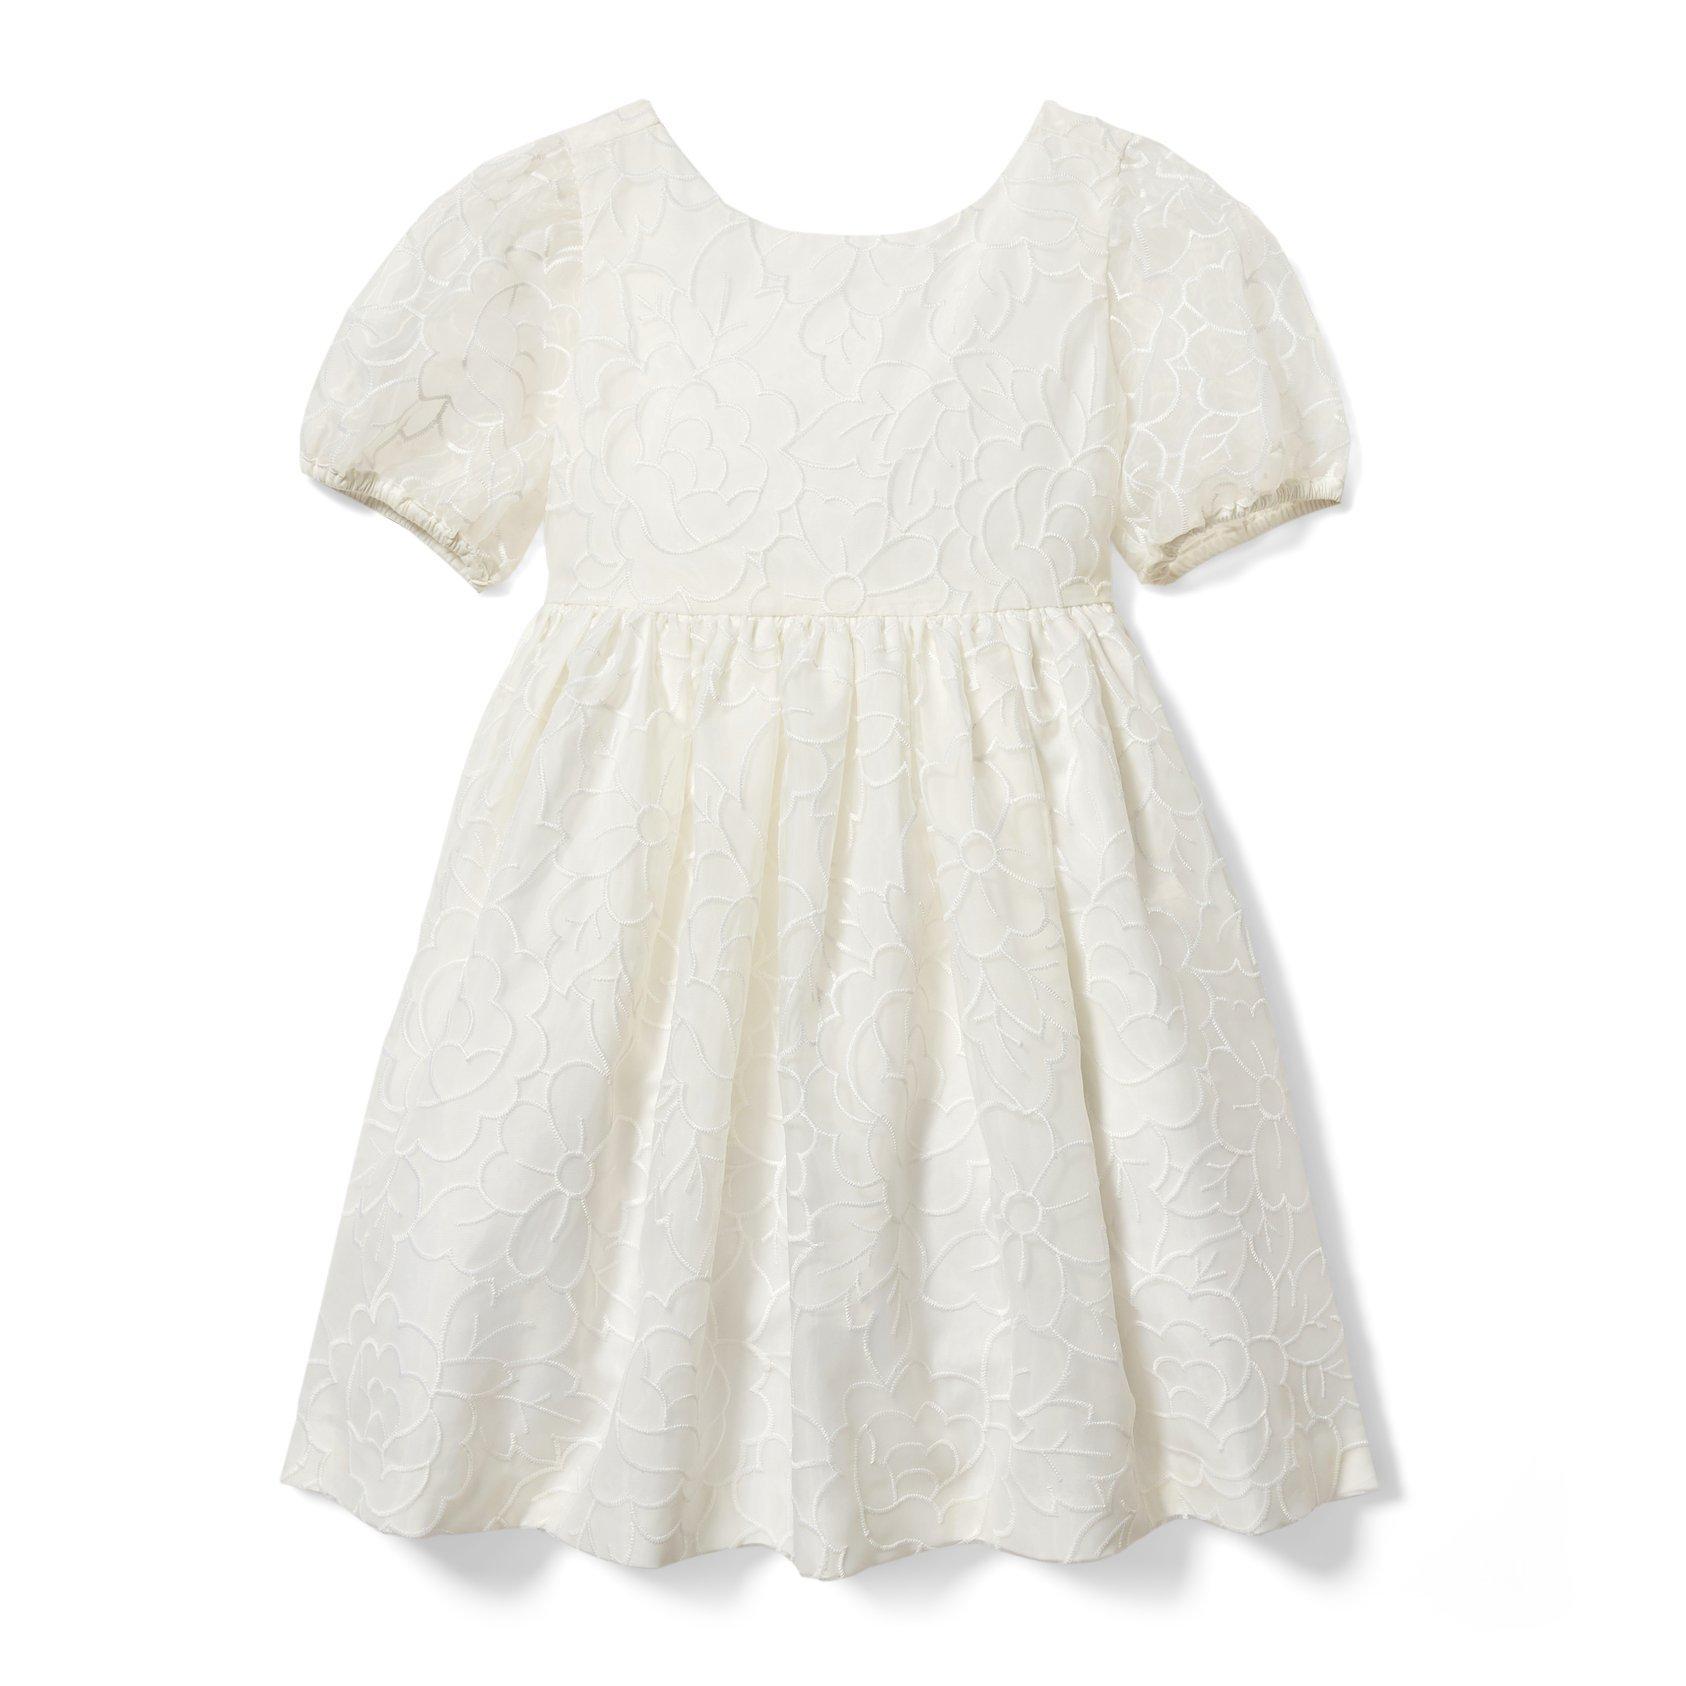 Girl White Organza Floral Dress by Janie and Jack